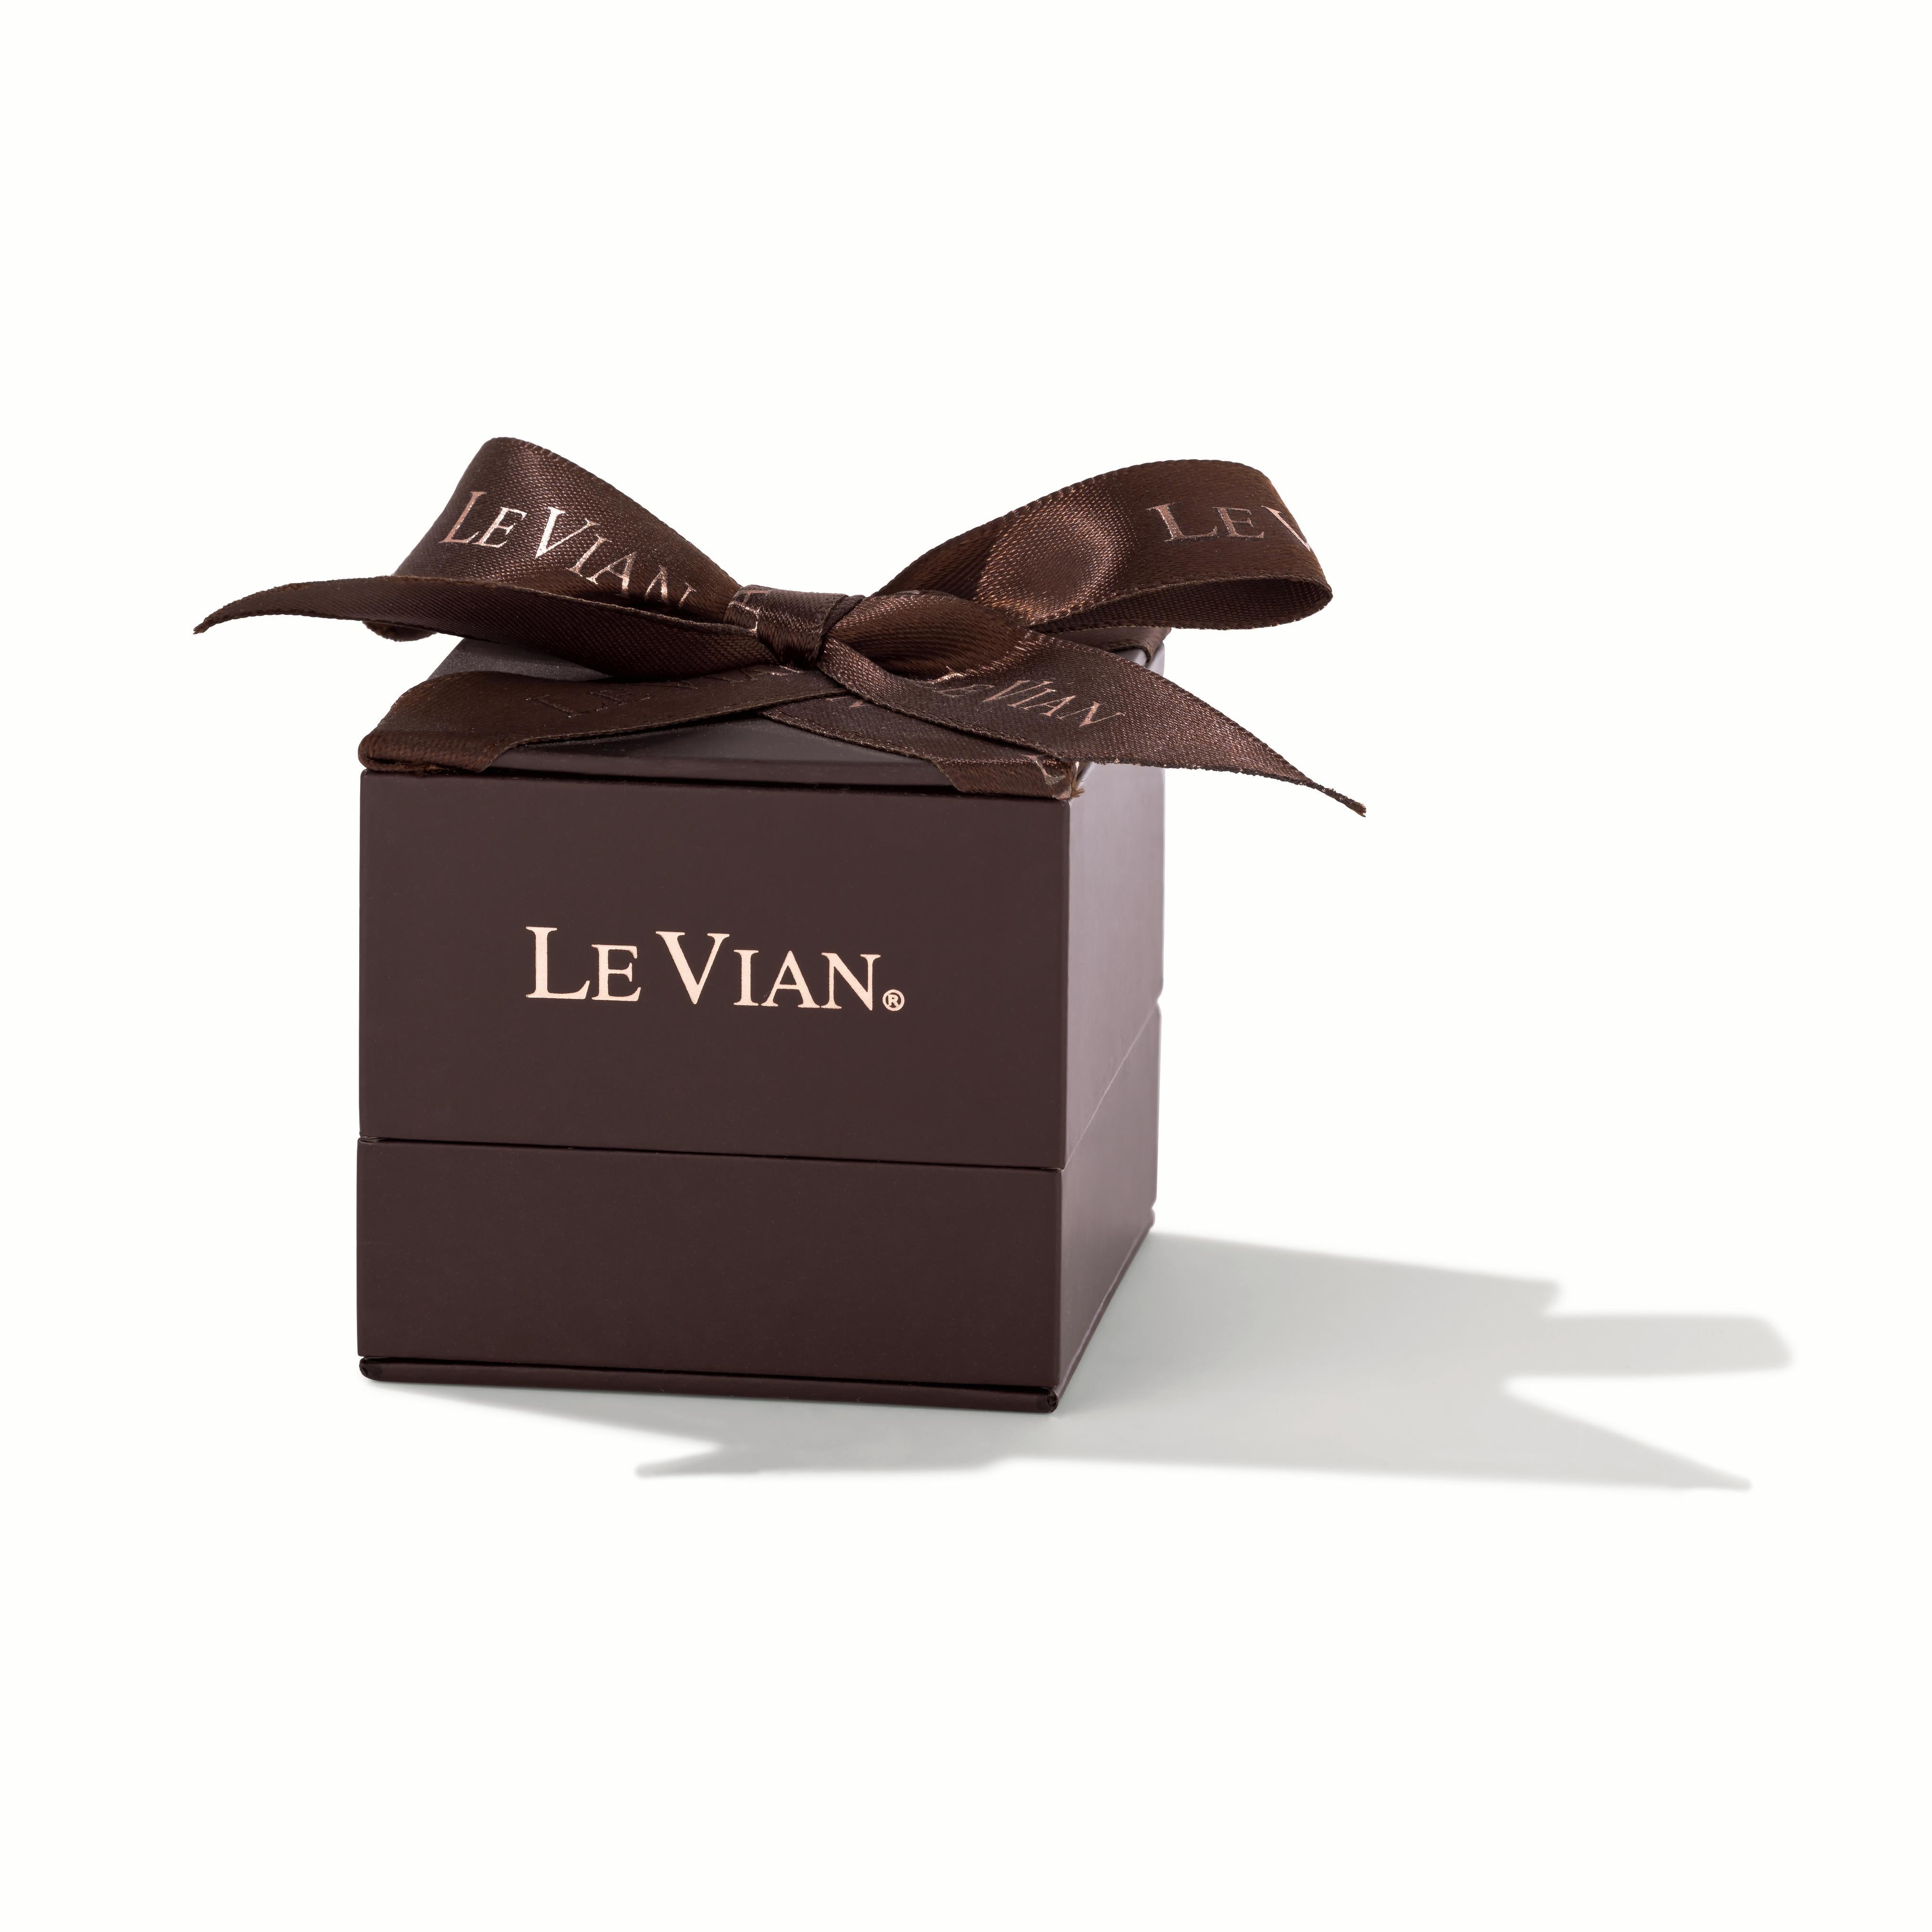 Le Vian® Pendant featuring 2.00 cts Vanilla Diamonds® set in 14K Honey Gold™

Diamonds Breakdown:
2.00 cts White Diamonds

Gems Breakdown:
None


Item comes with a Le Vian® jewelry box as well as a Le Vian® suede pouch

FREE SHIPPING & FREE 30 DAY